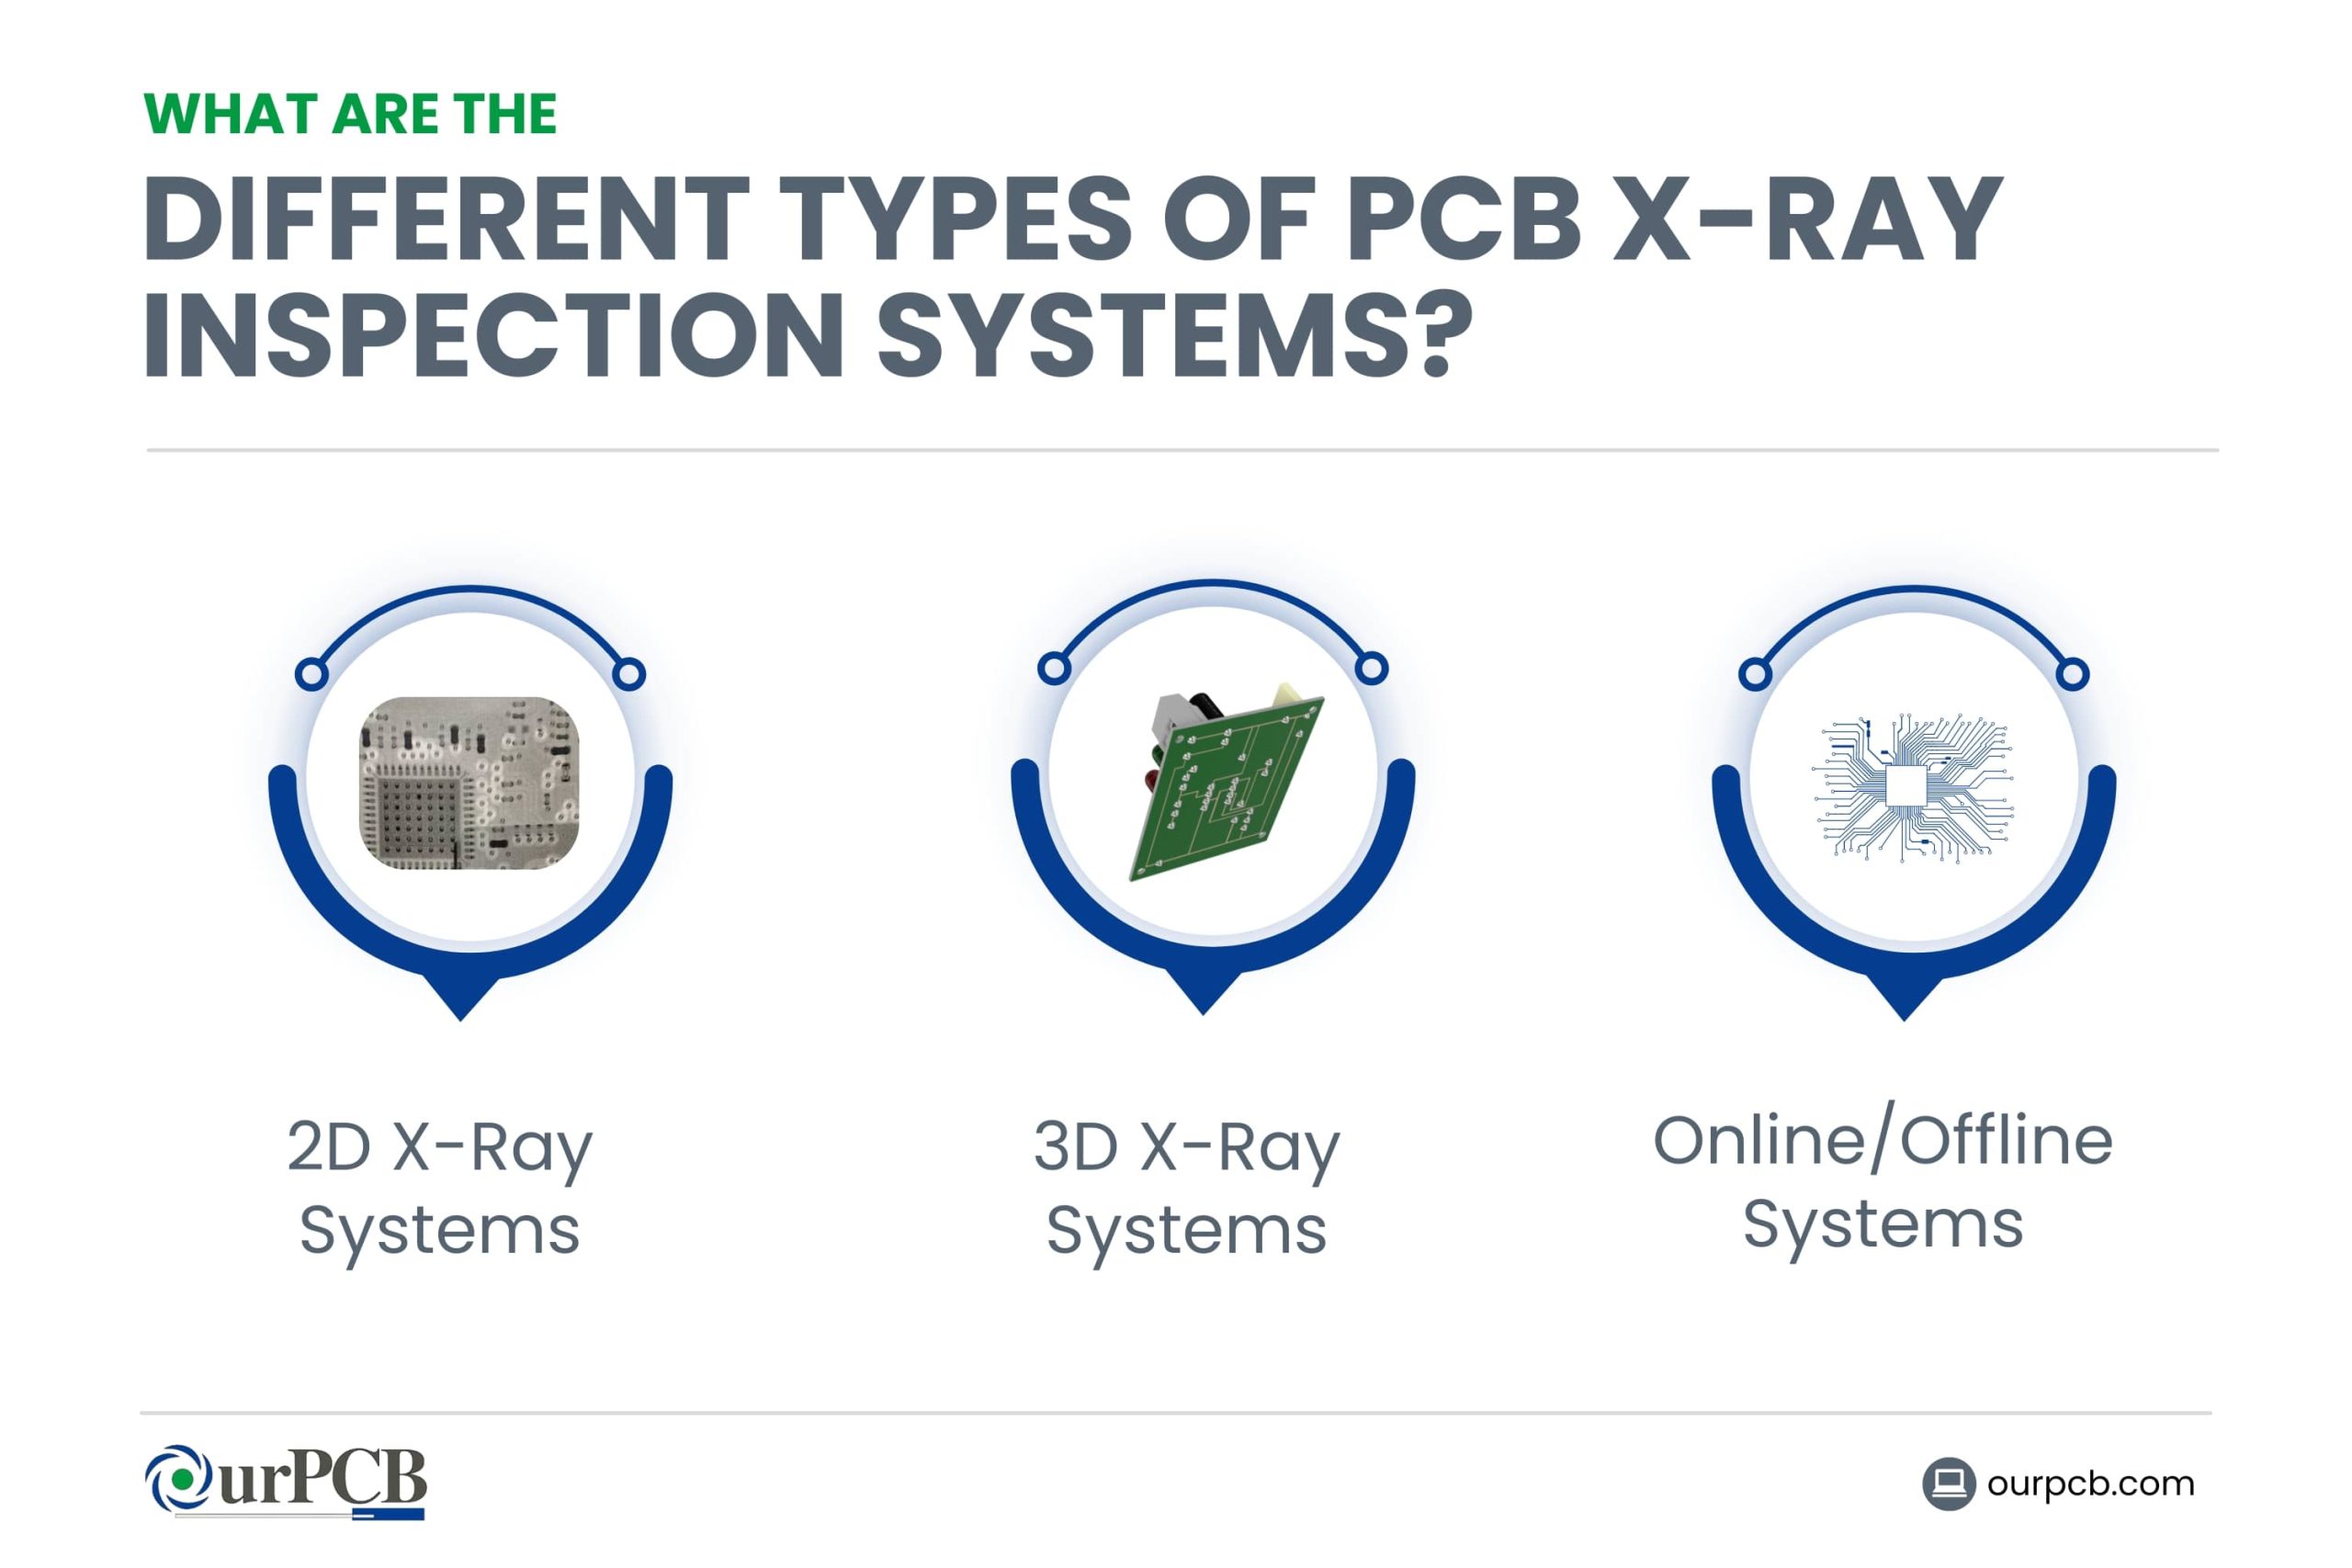 What are the Different Types of PCB X-Ray Inspection Systems?